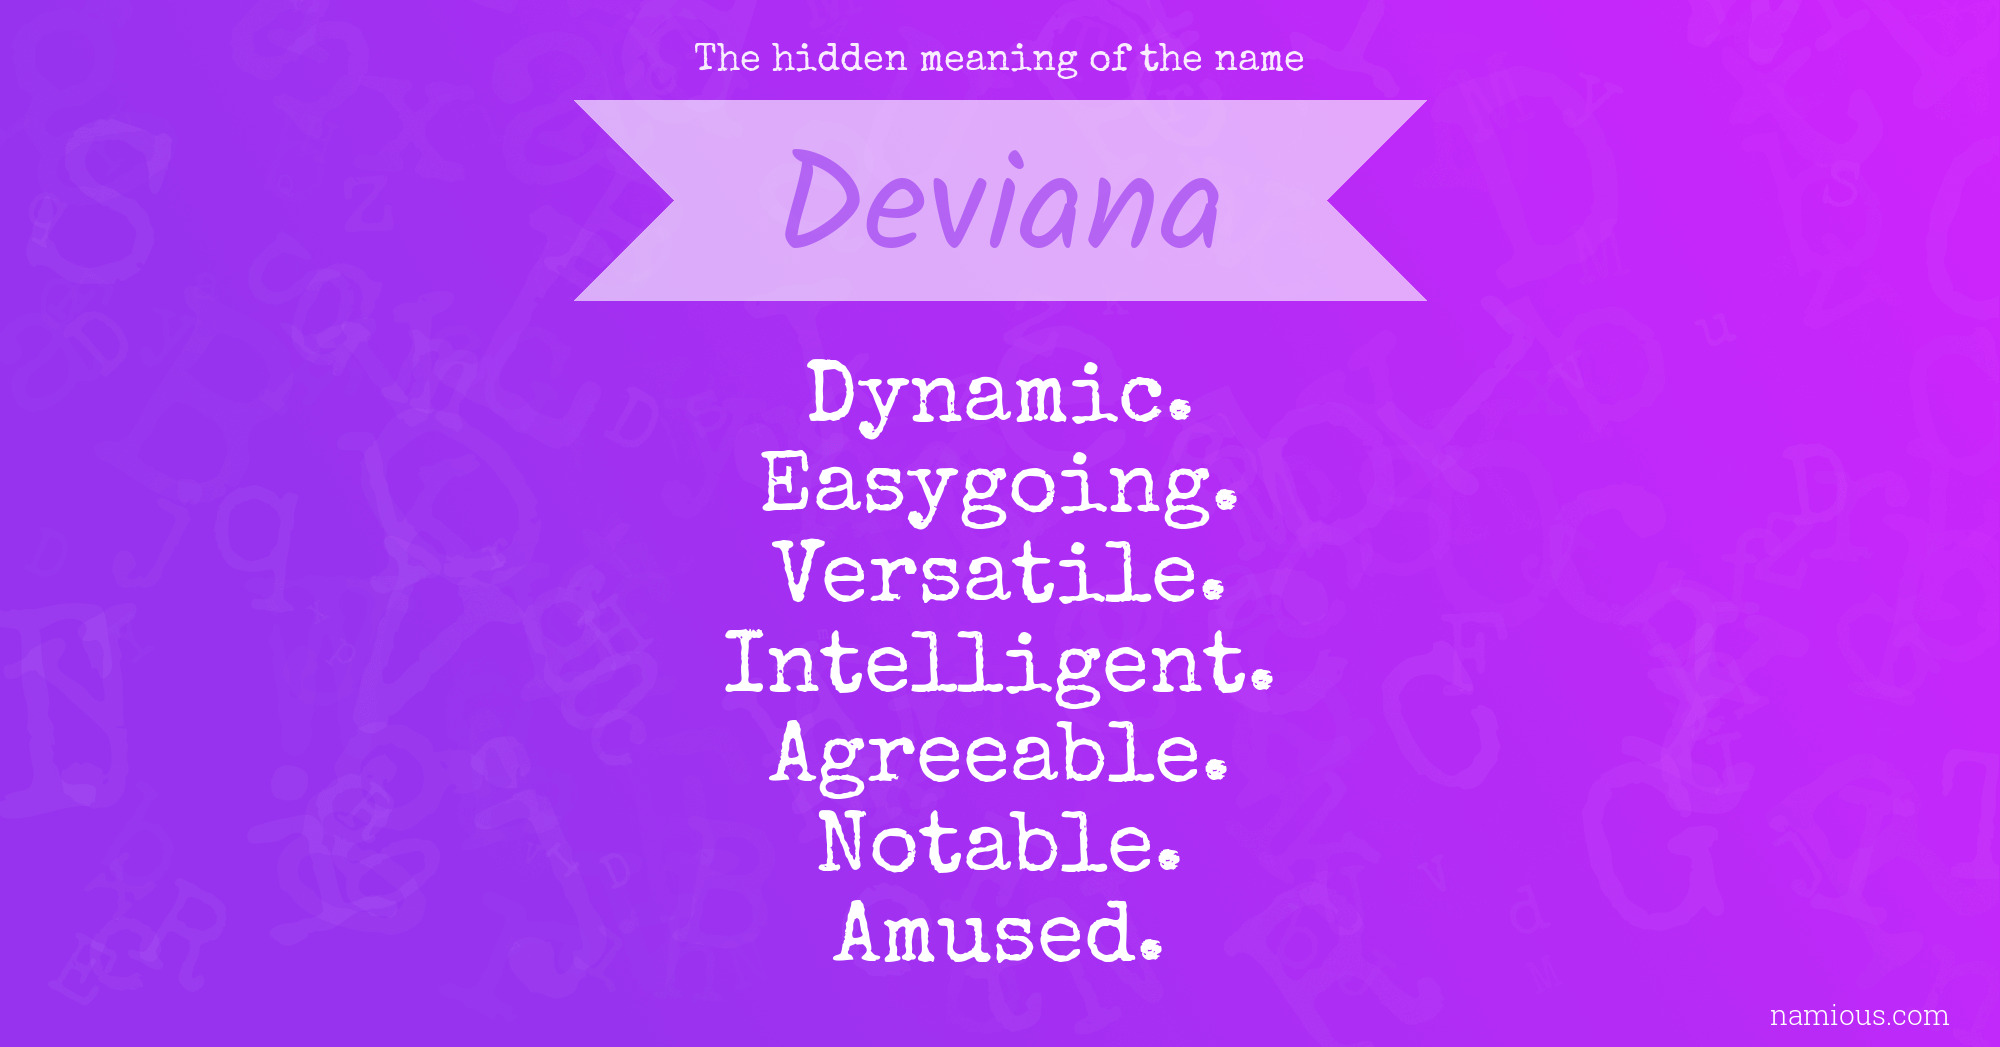 The hidden meaning of the name Deviana